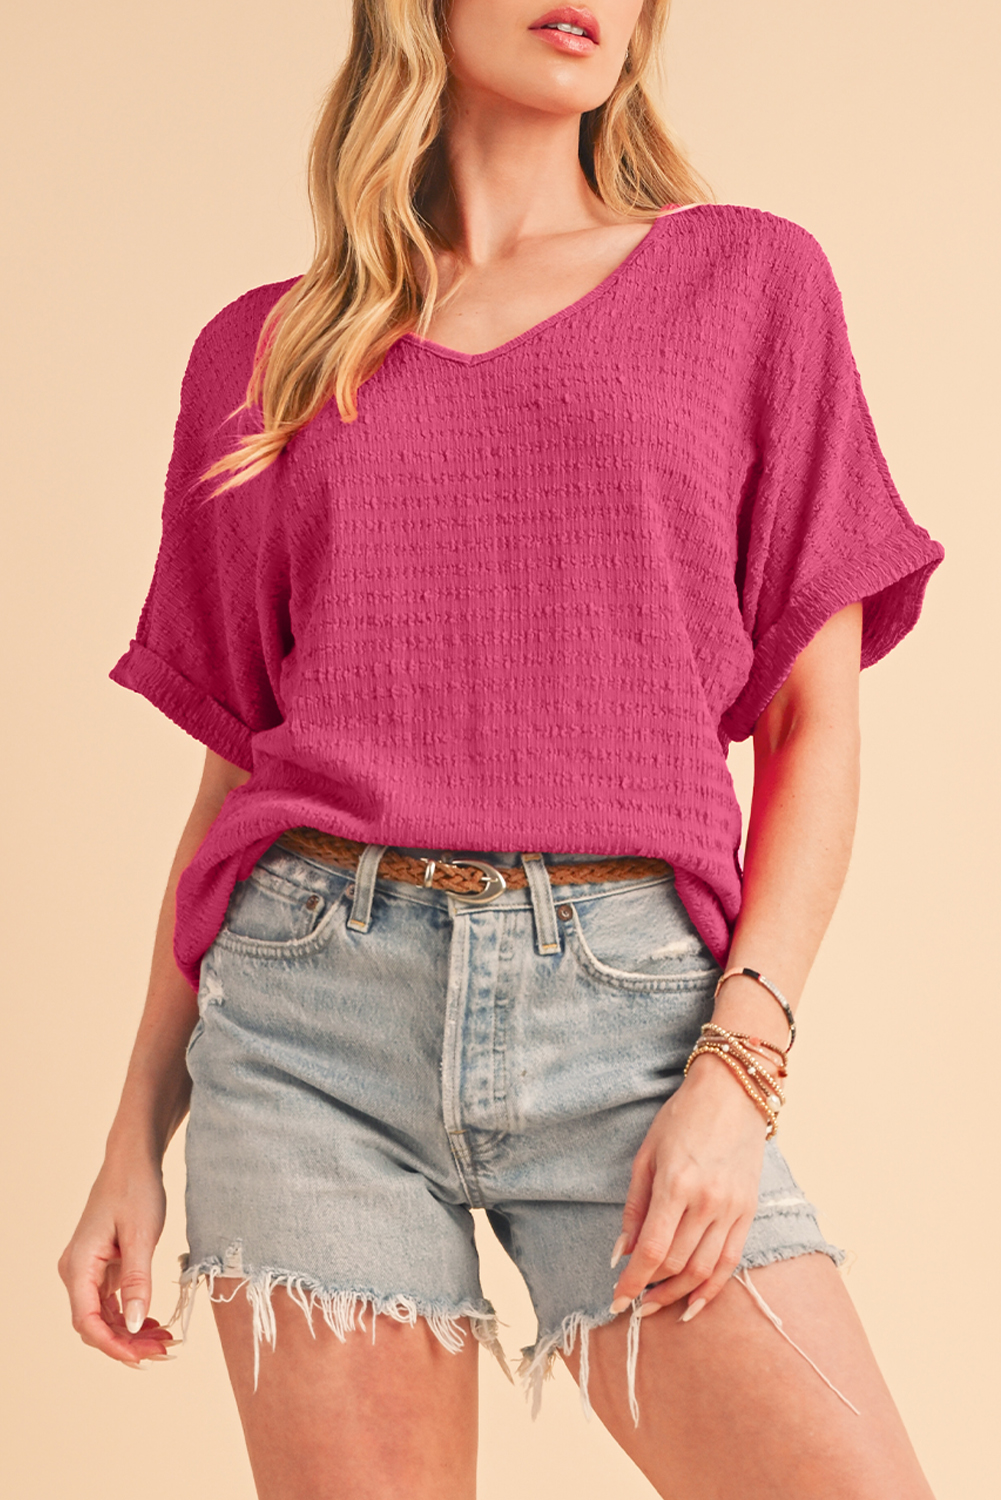 Shewin Wholesale Dropship Bright Pink Textured Rolled Sleeve V Neck T SHIRT